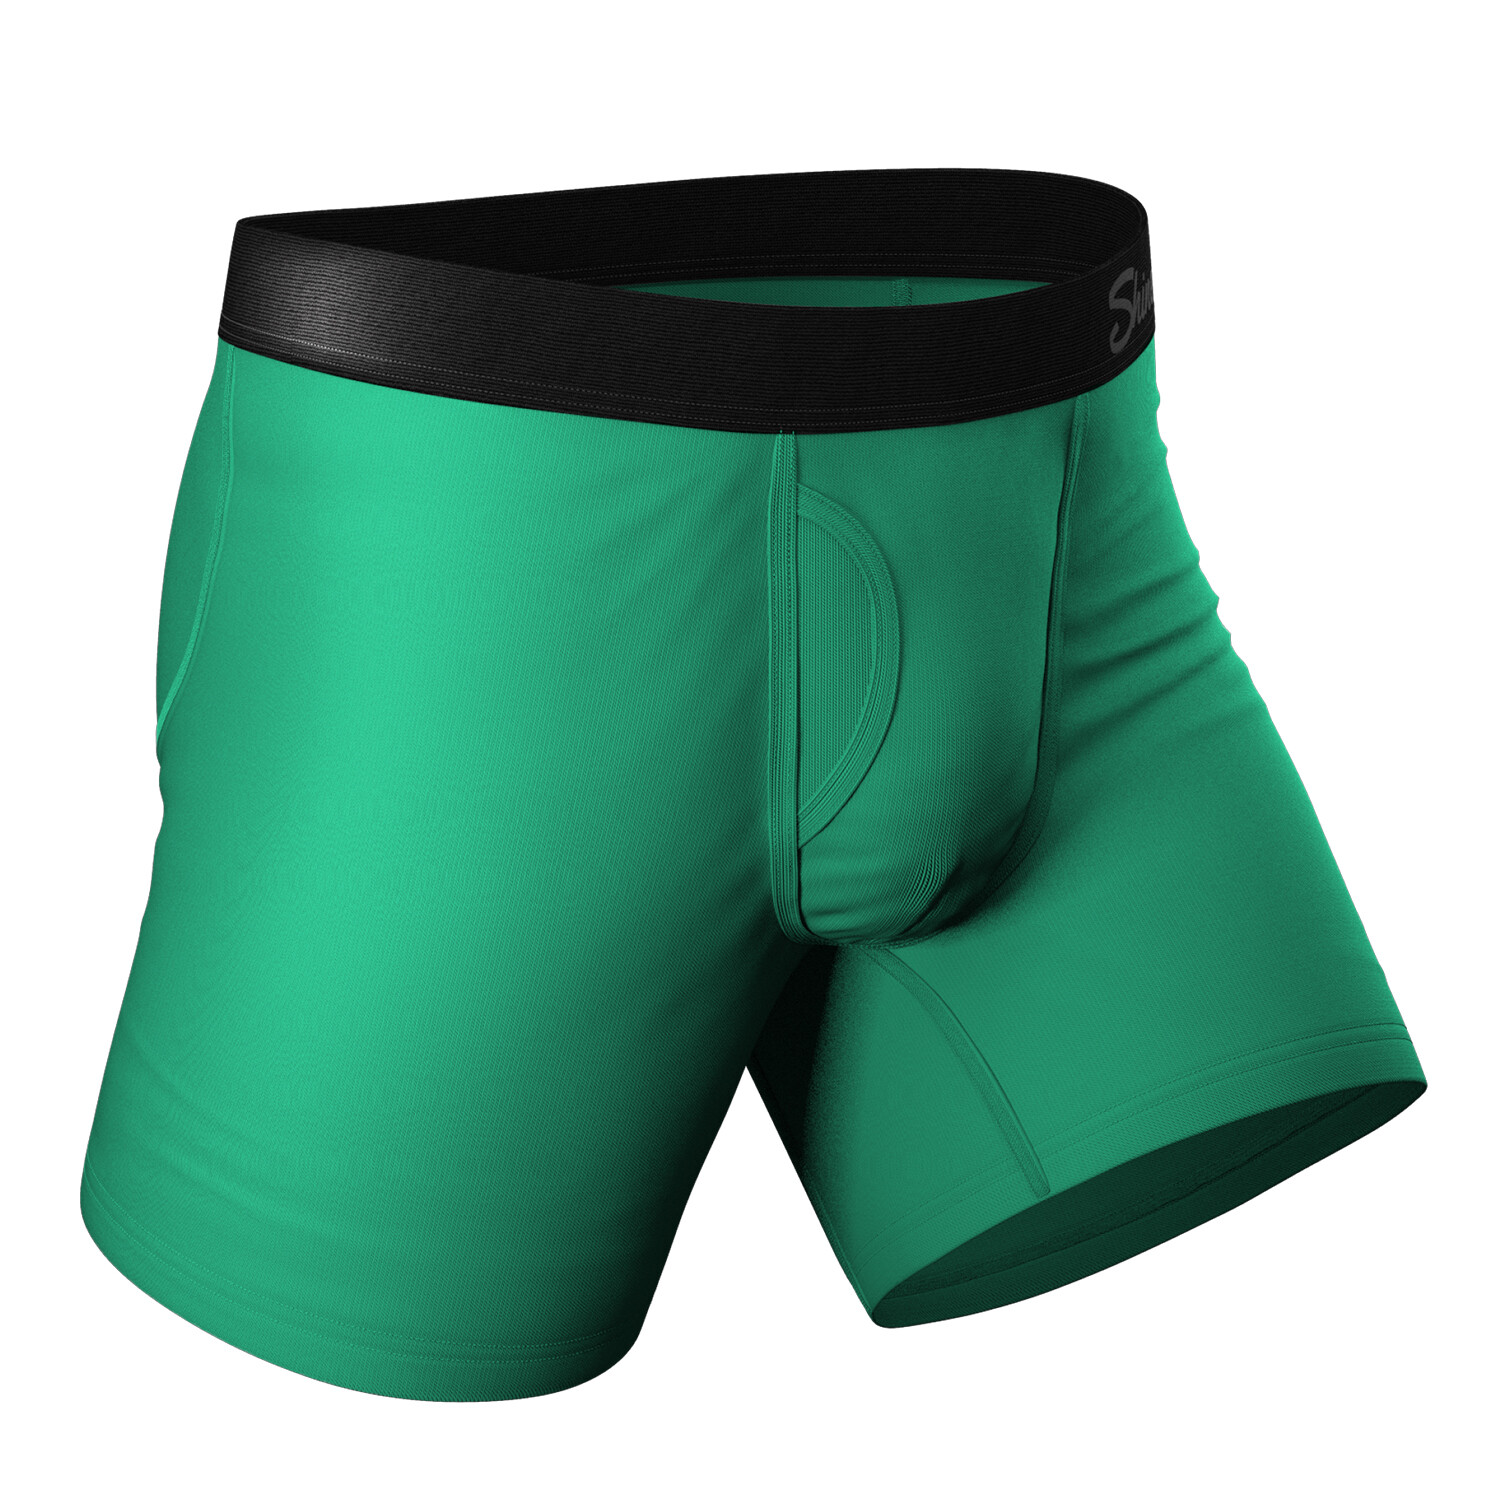 The Green Boys - Shinesty Men's Green Ball Hammock Pouch Underwear With Fly  XL 